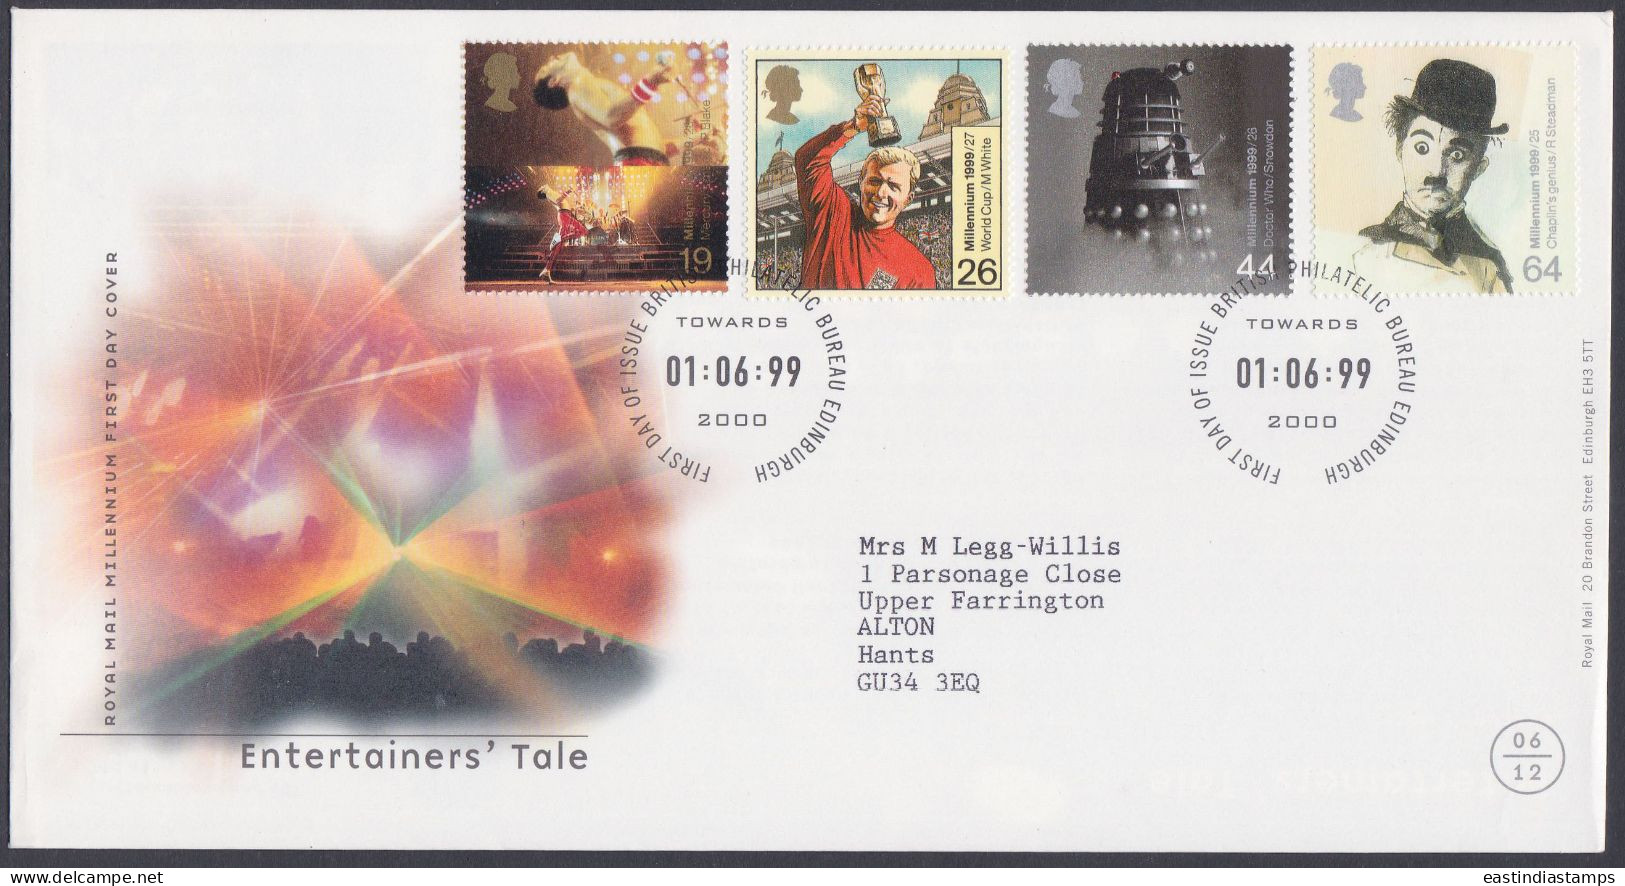 GB Great Britain 1999 FDC Entertainers' Tale, Charlie Chaplin, Film, Football, Music Pictorial Postmark, First Day Cover - Briefe U. Dokumente